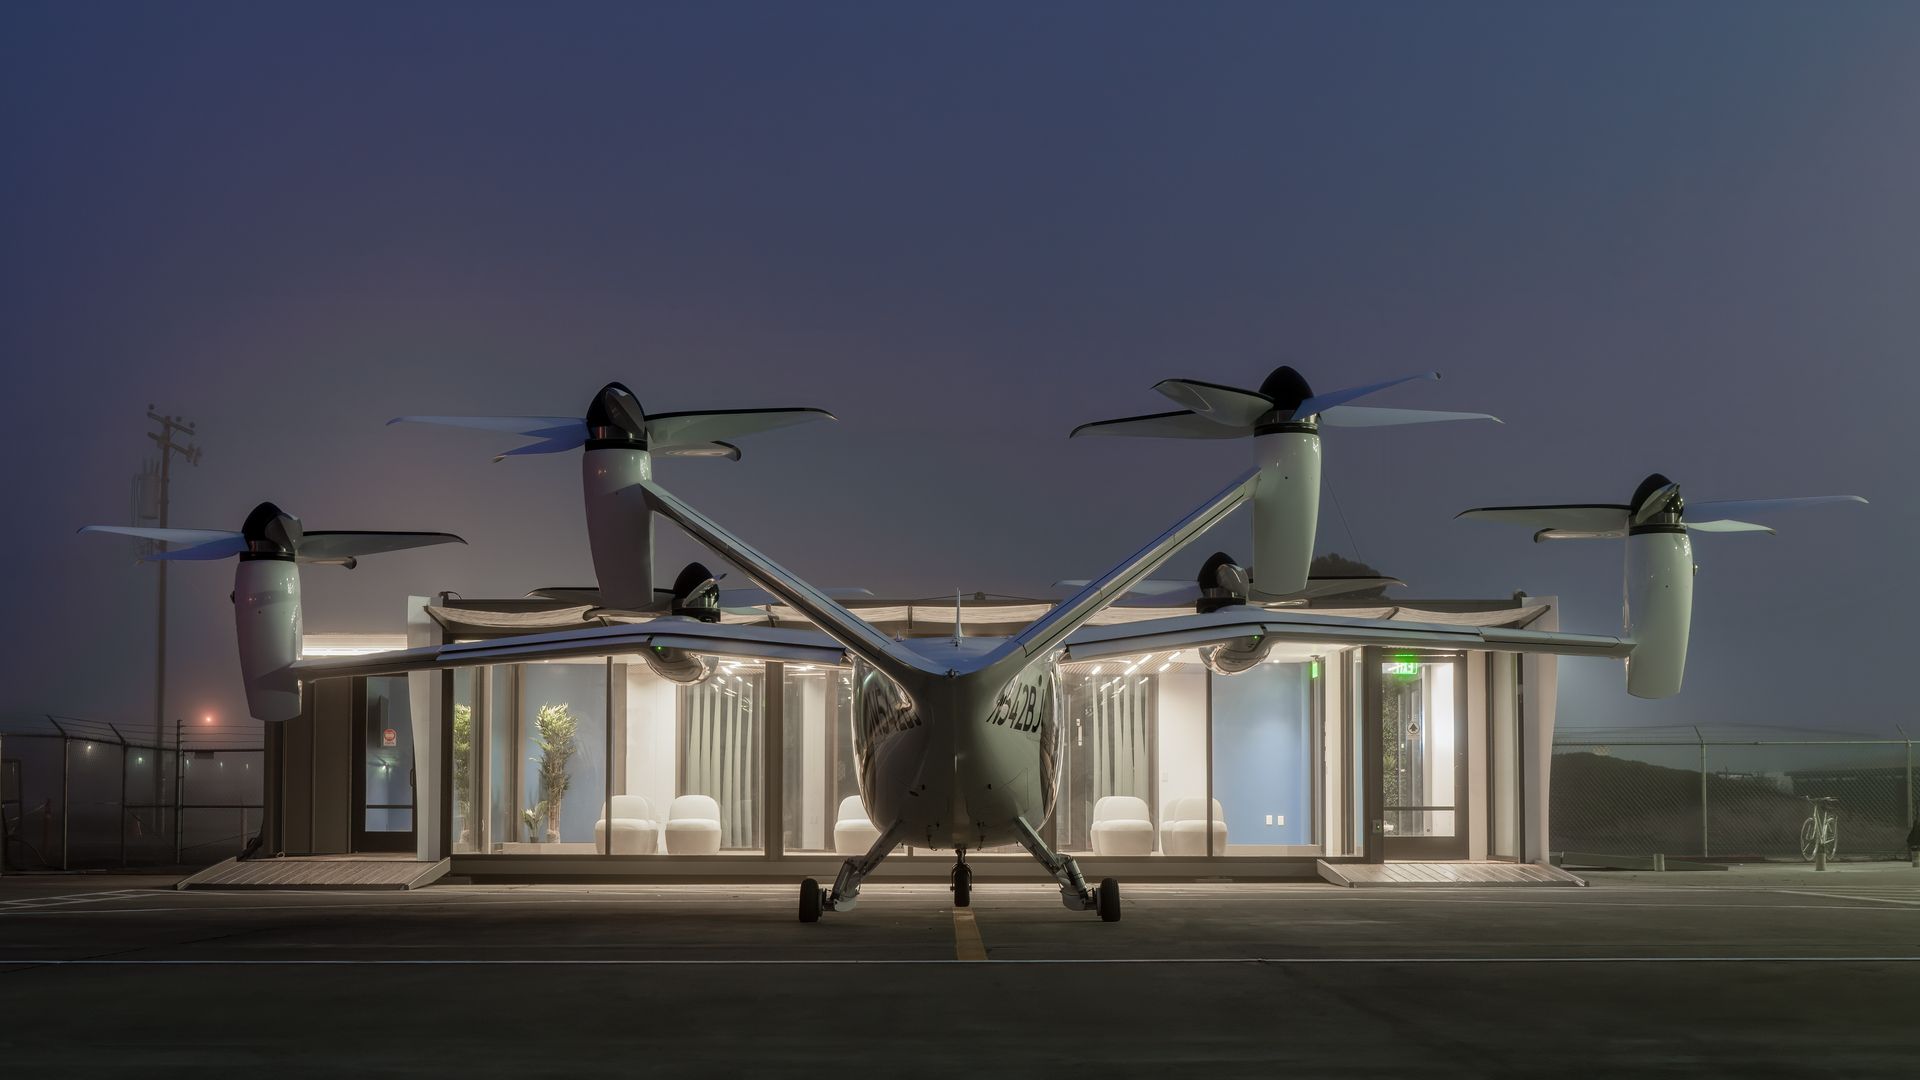 Nightime image of a electric air taxi parked in front of a so-called vertiport where commuters can catch a convenient flight to or from the airport. 